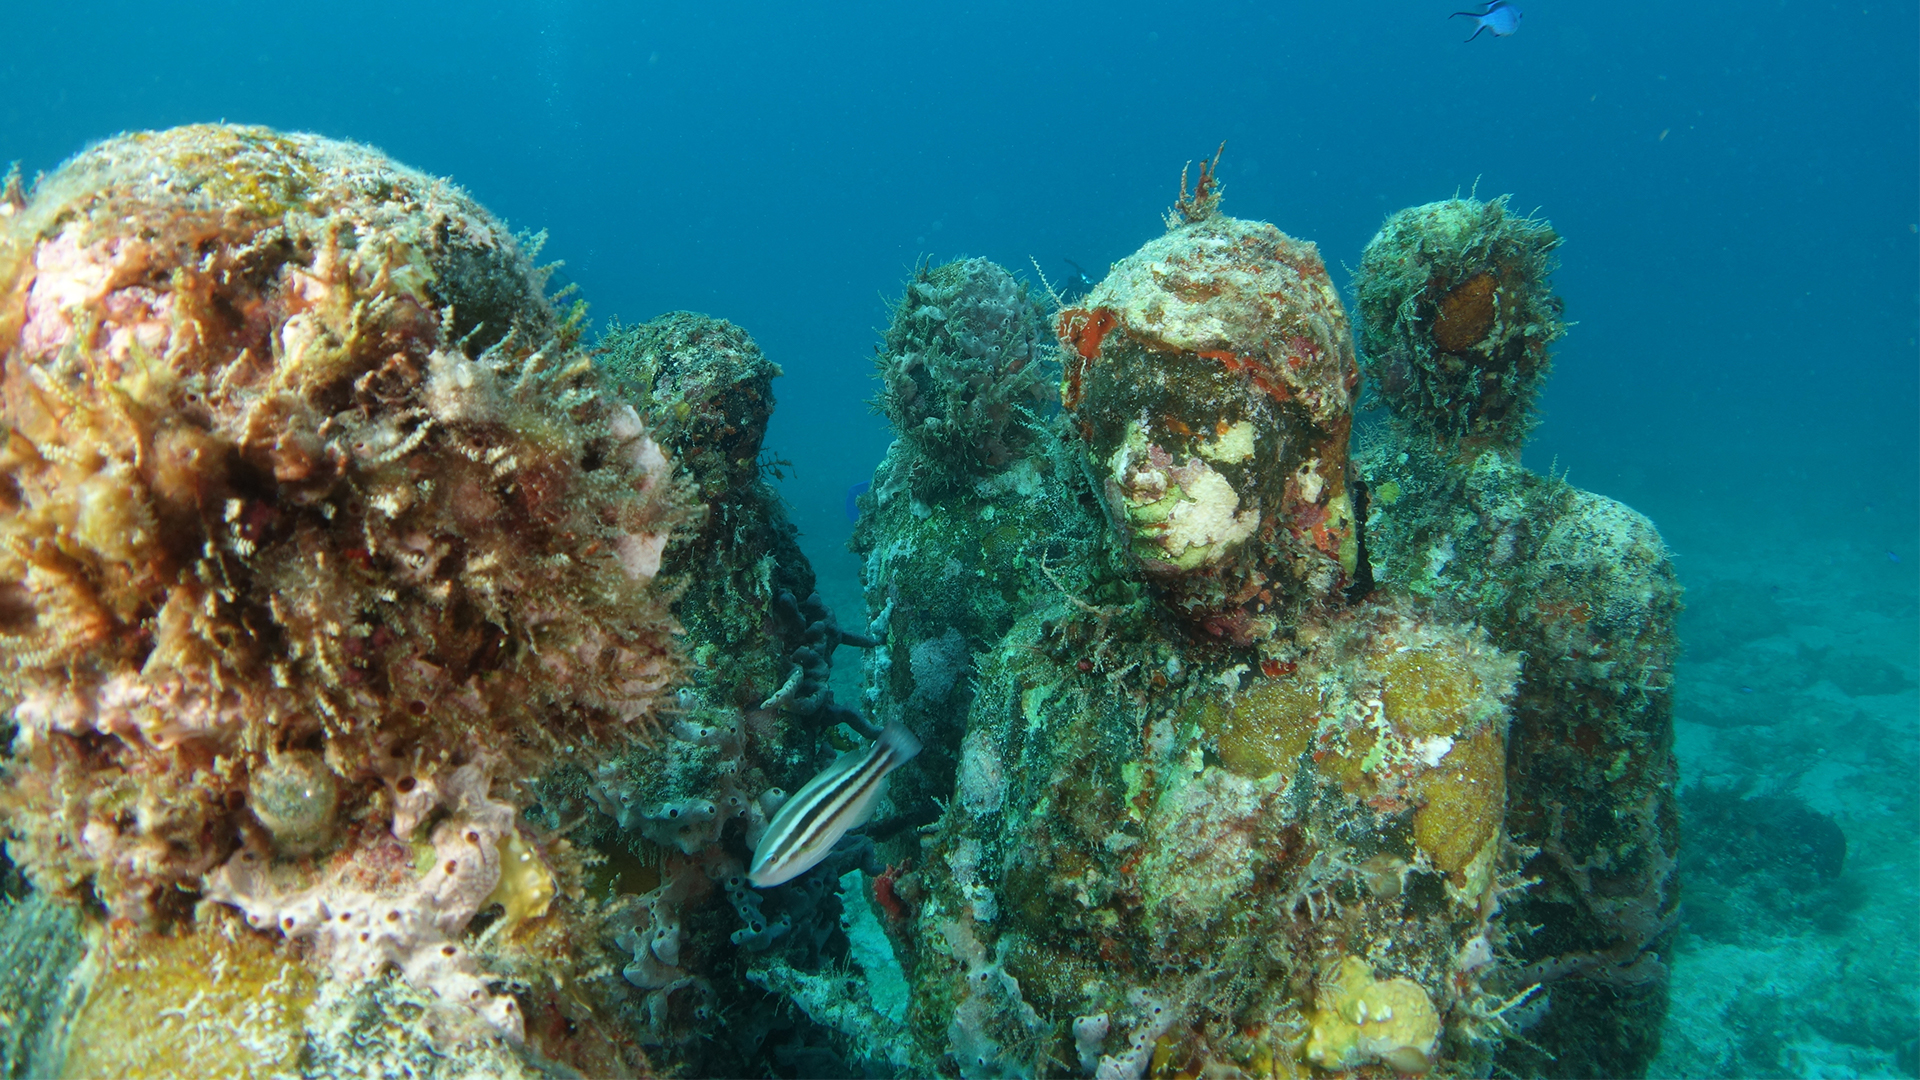 Mesmerizing statues at the Underwater Museum of Art